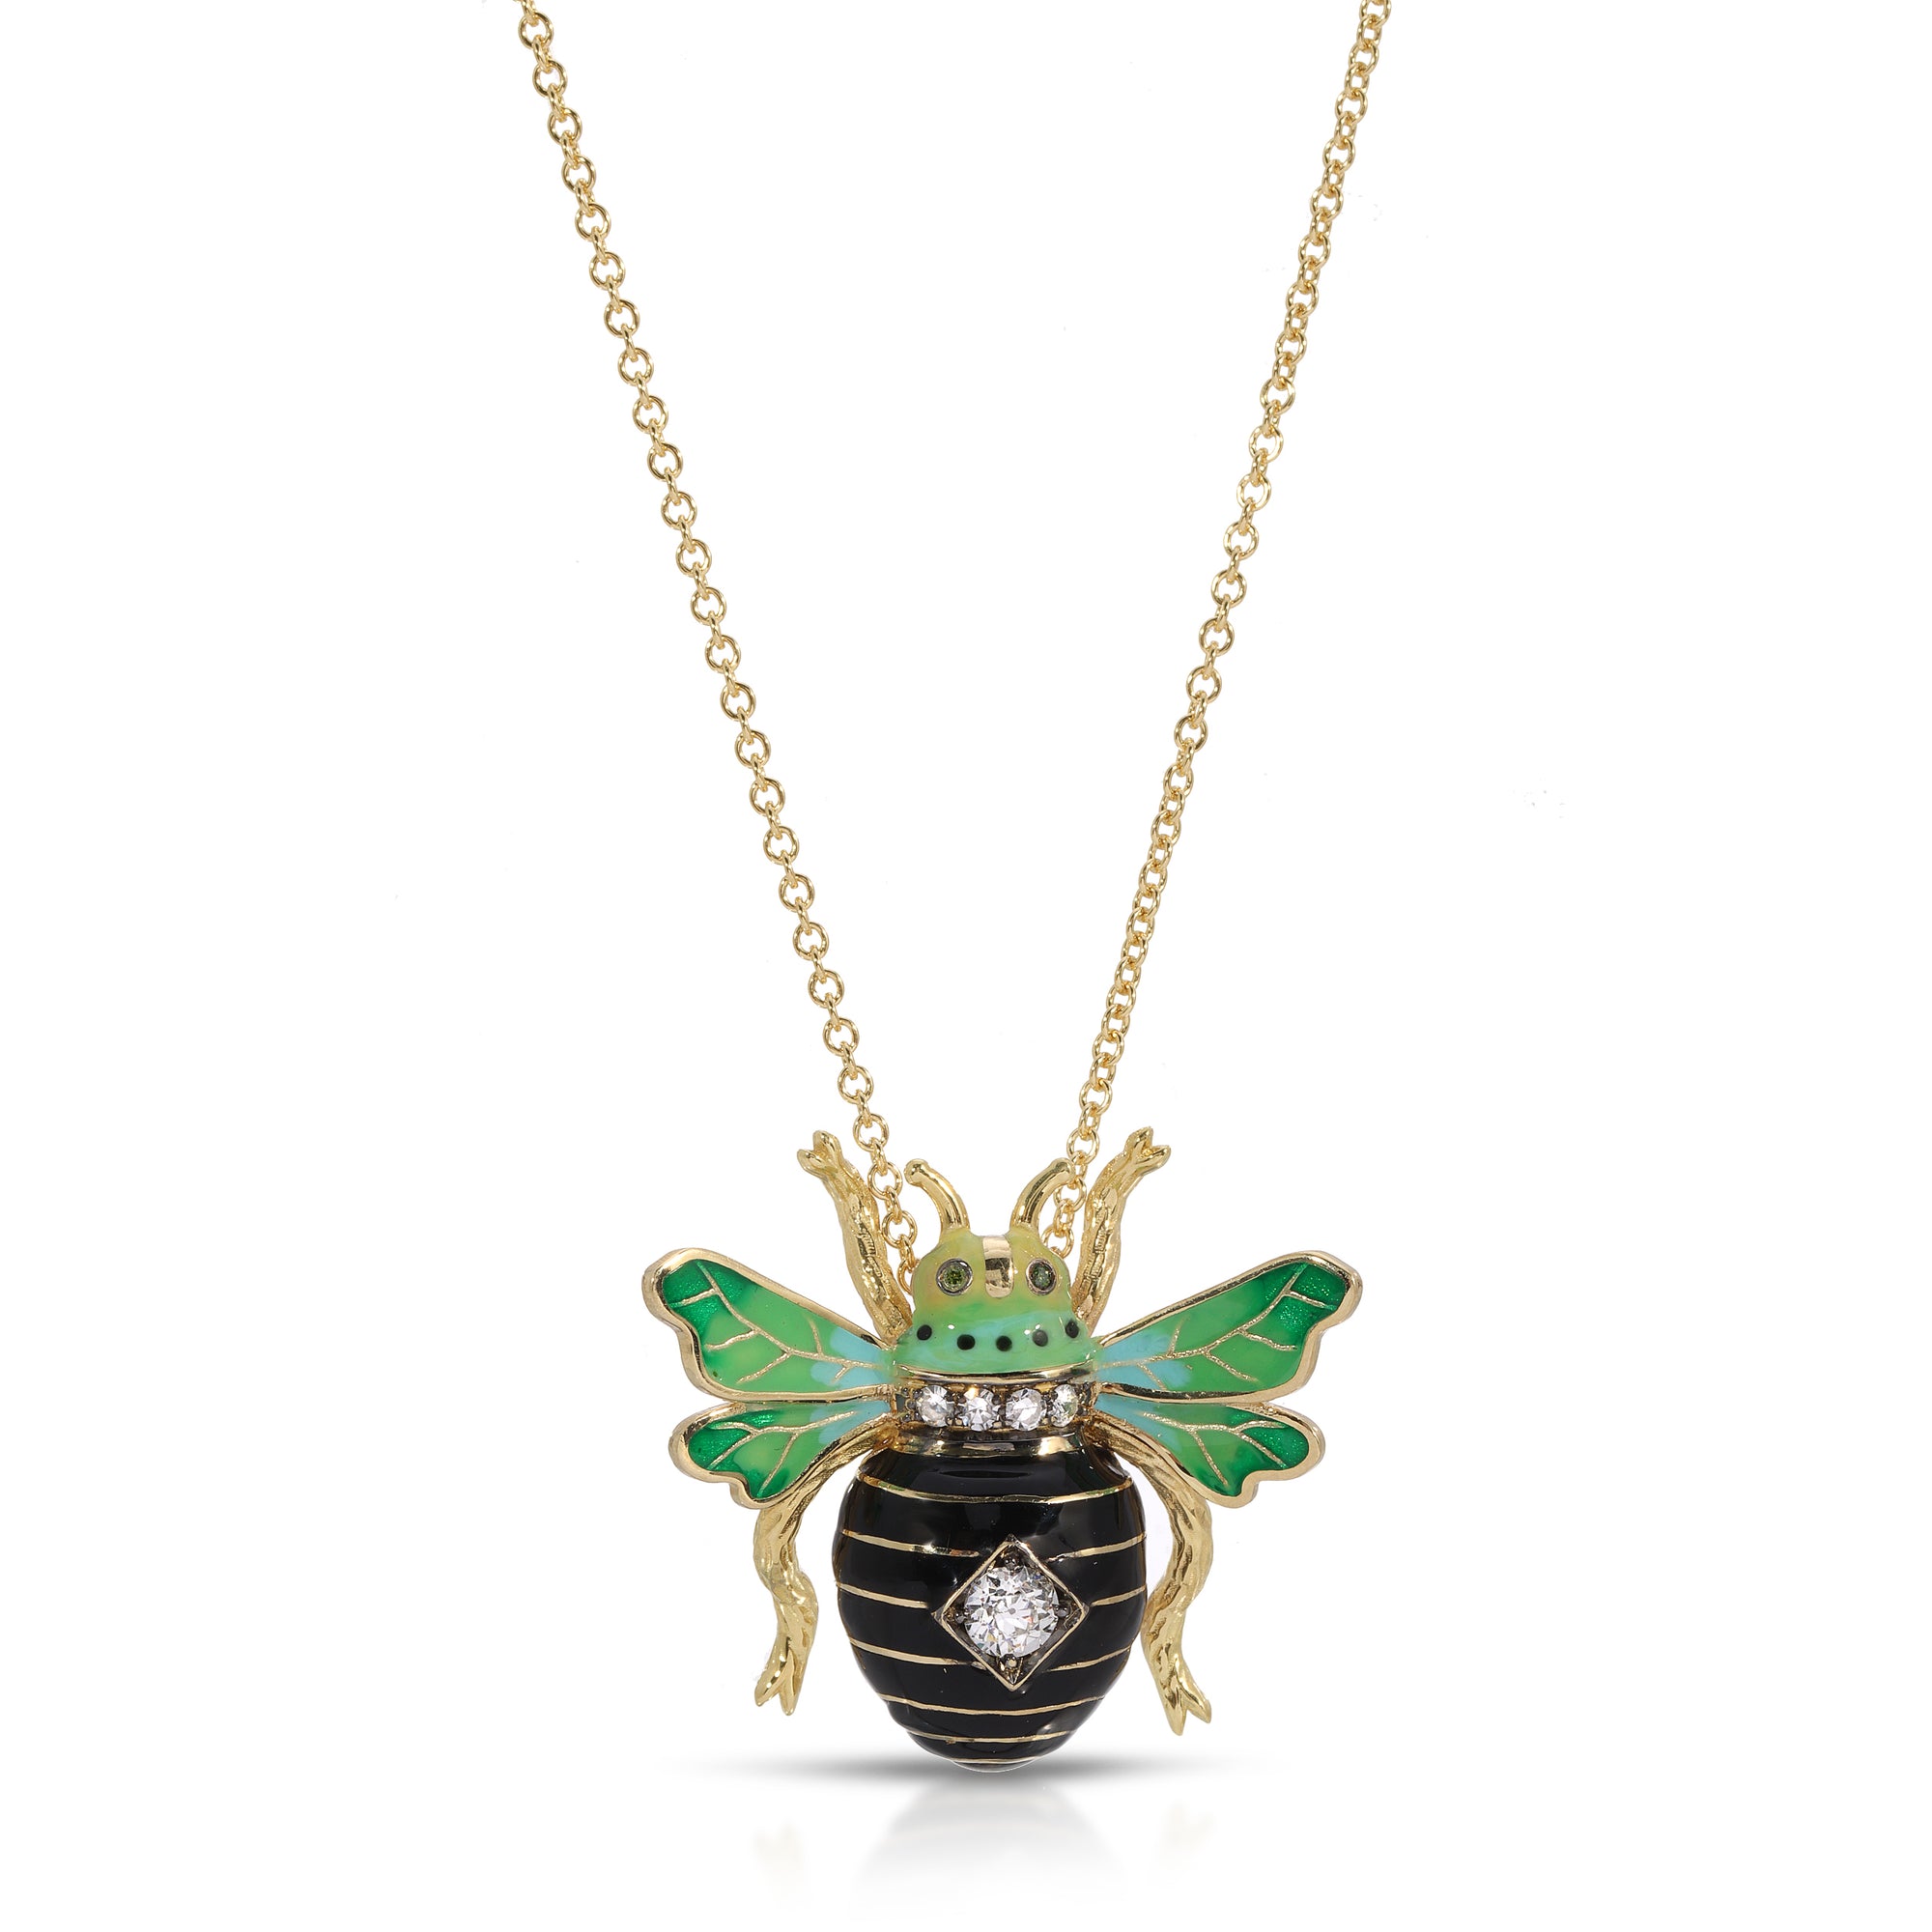 Queen Bee Pendant Necklace by Lord Jewelry available at Talisman Collection Fine Jewelers in El Dorado Hills, CA and online. A classic and often preppy motif, this delightful 18k enamel bumble bee necklace gets the royal treatment! Featuring ombre green wings and a black body, she is accented with a 0.41 carat diamond for a touch of sparkle. Worn alone or layered, this regal 18" necklace will add a touch of playfulness to your look.